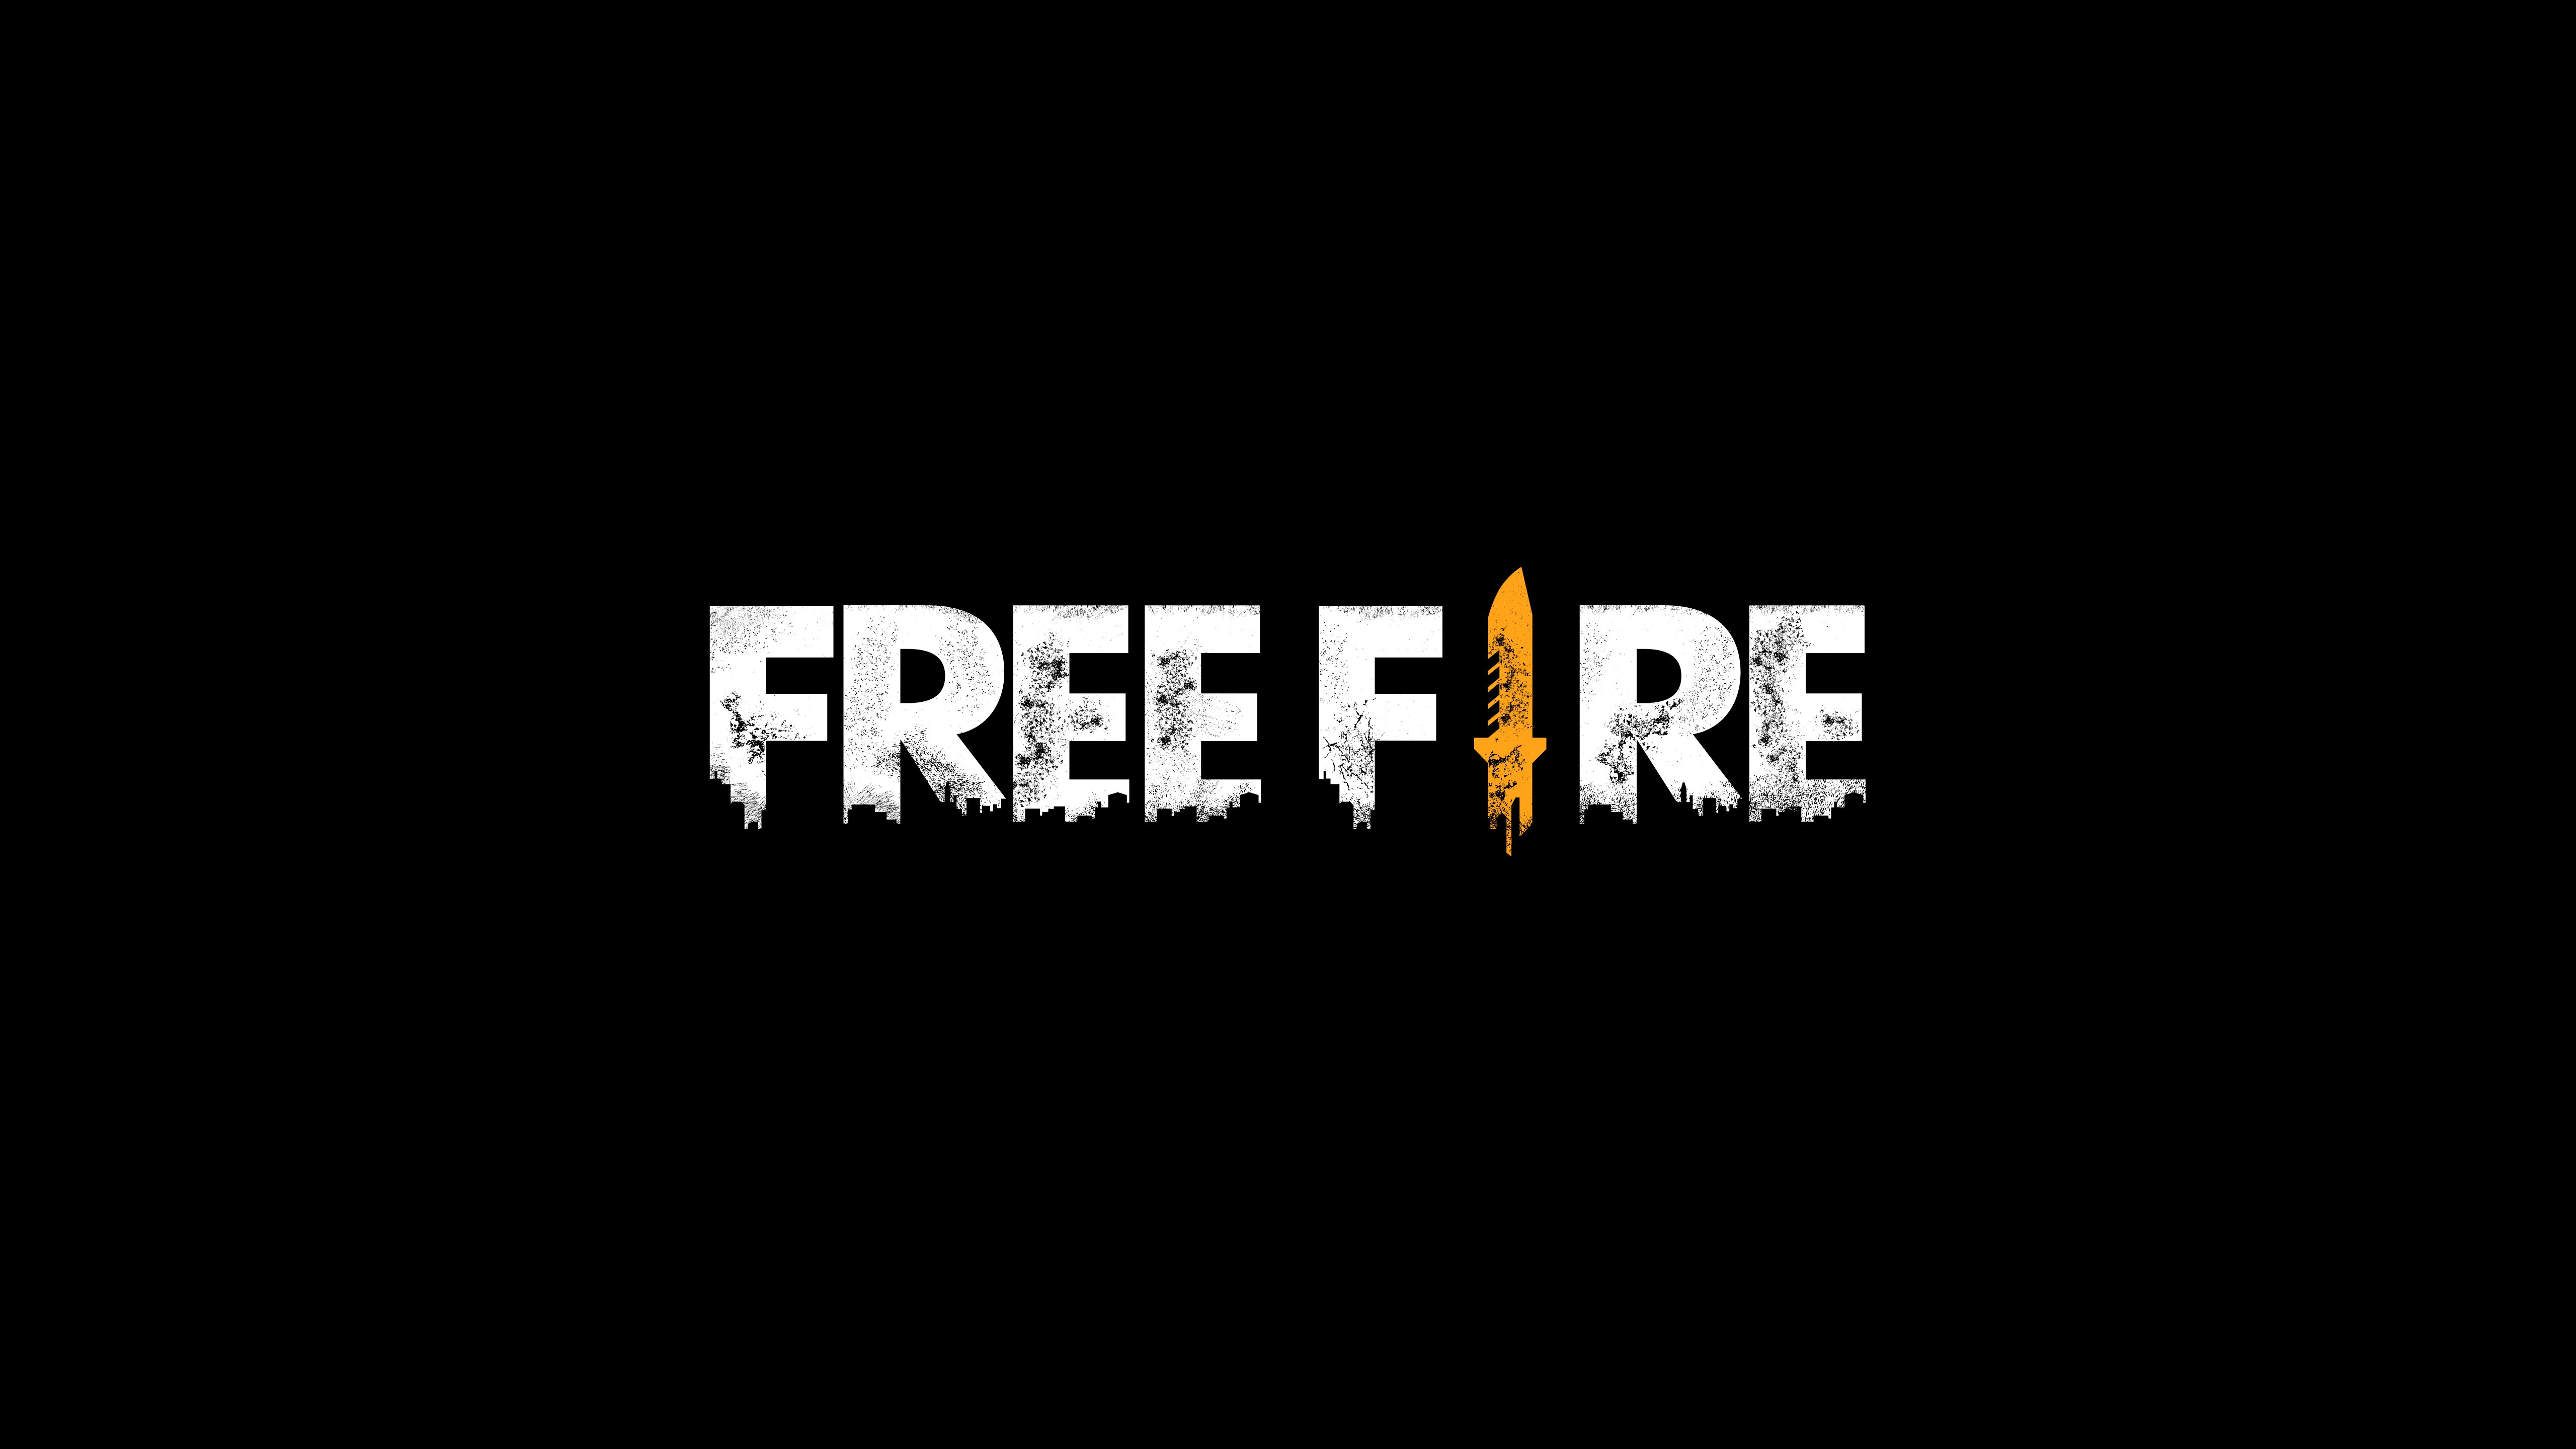 hd wallpapers 1080p download for pc gaming free fire